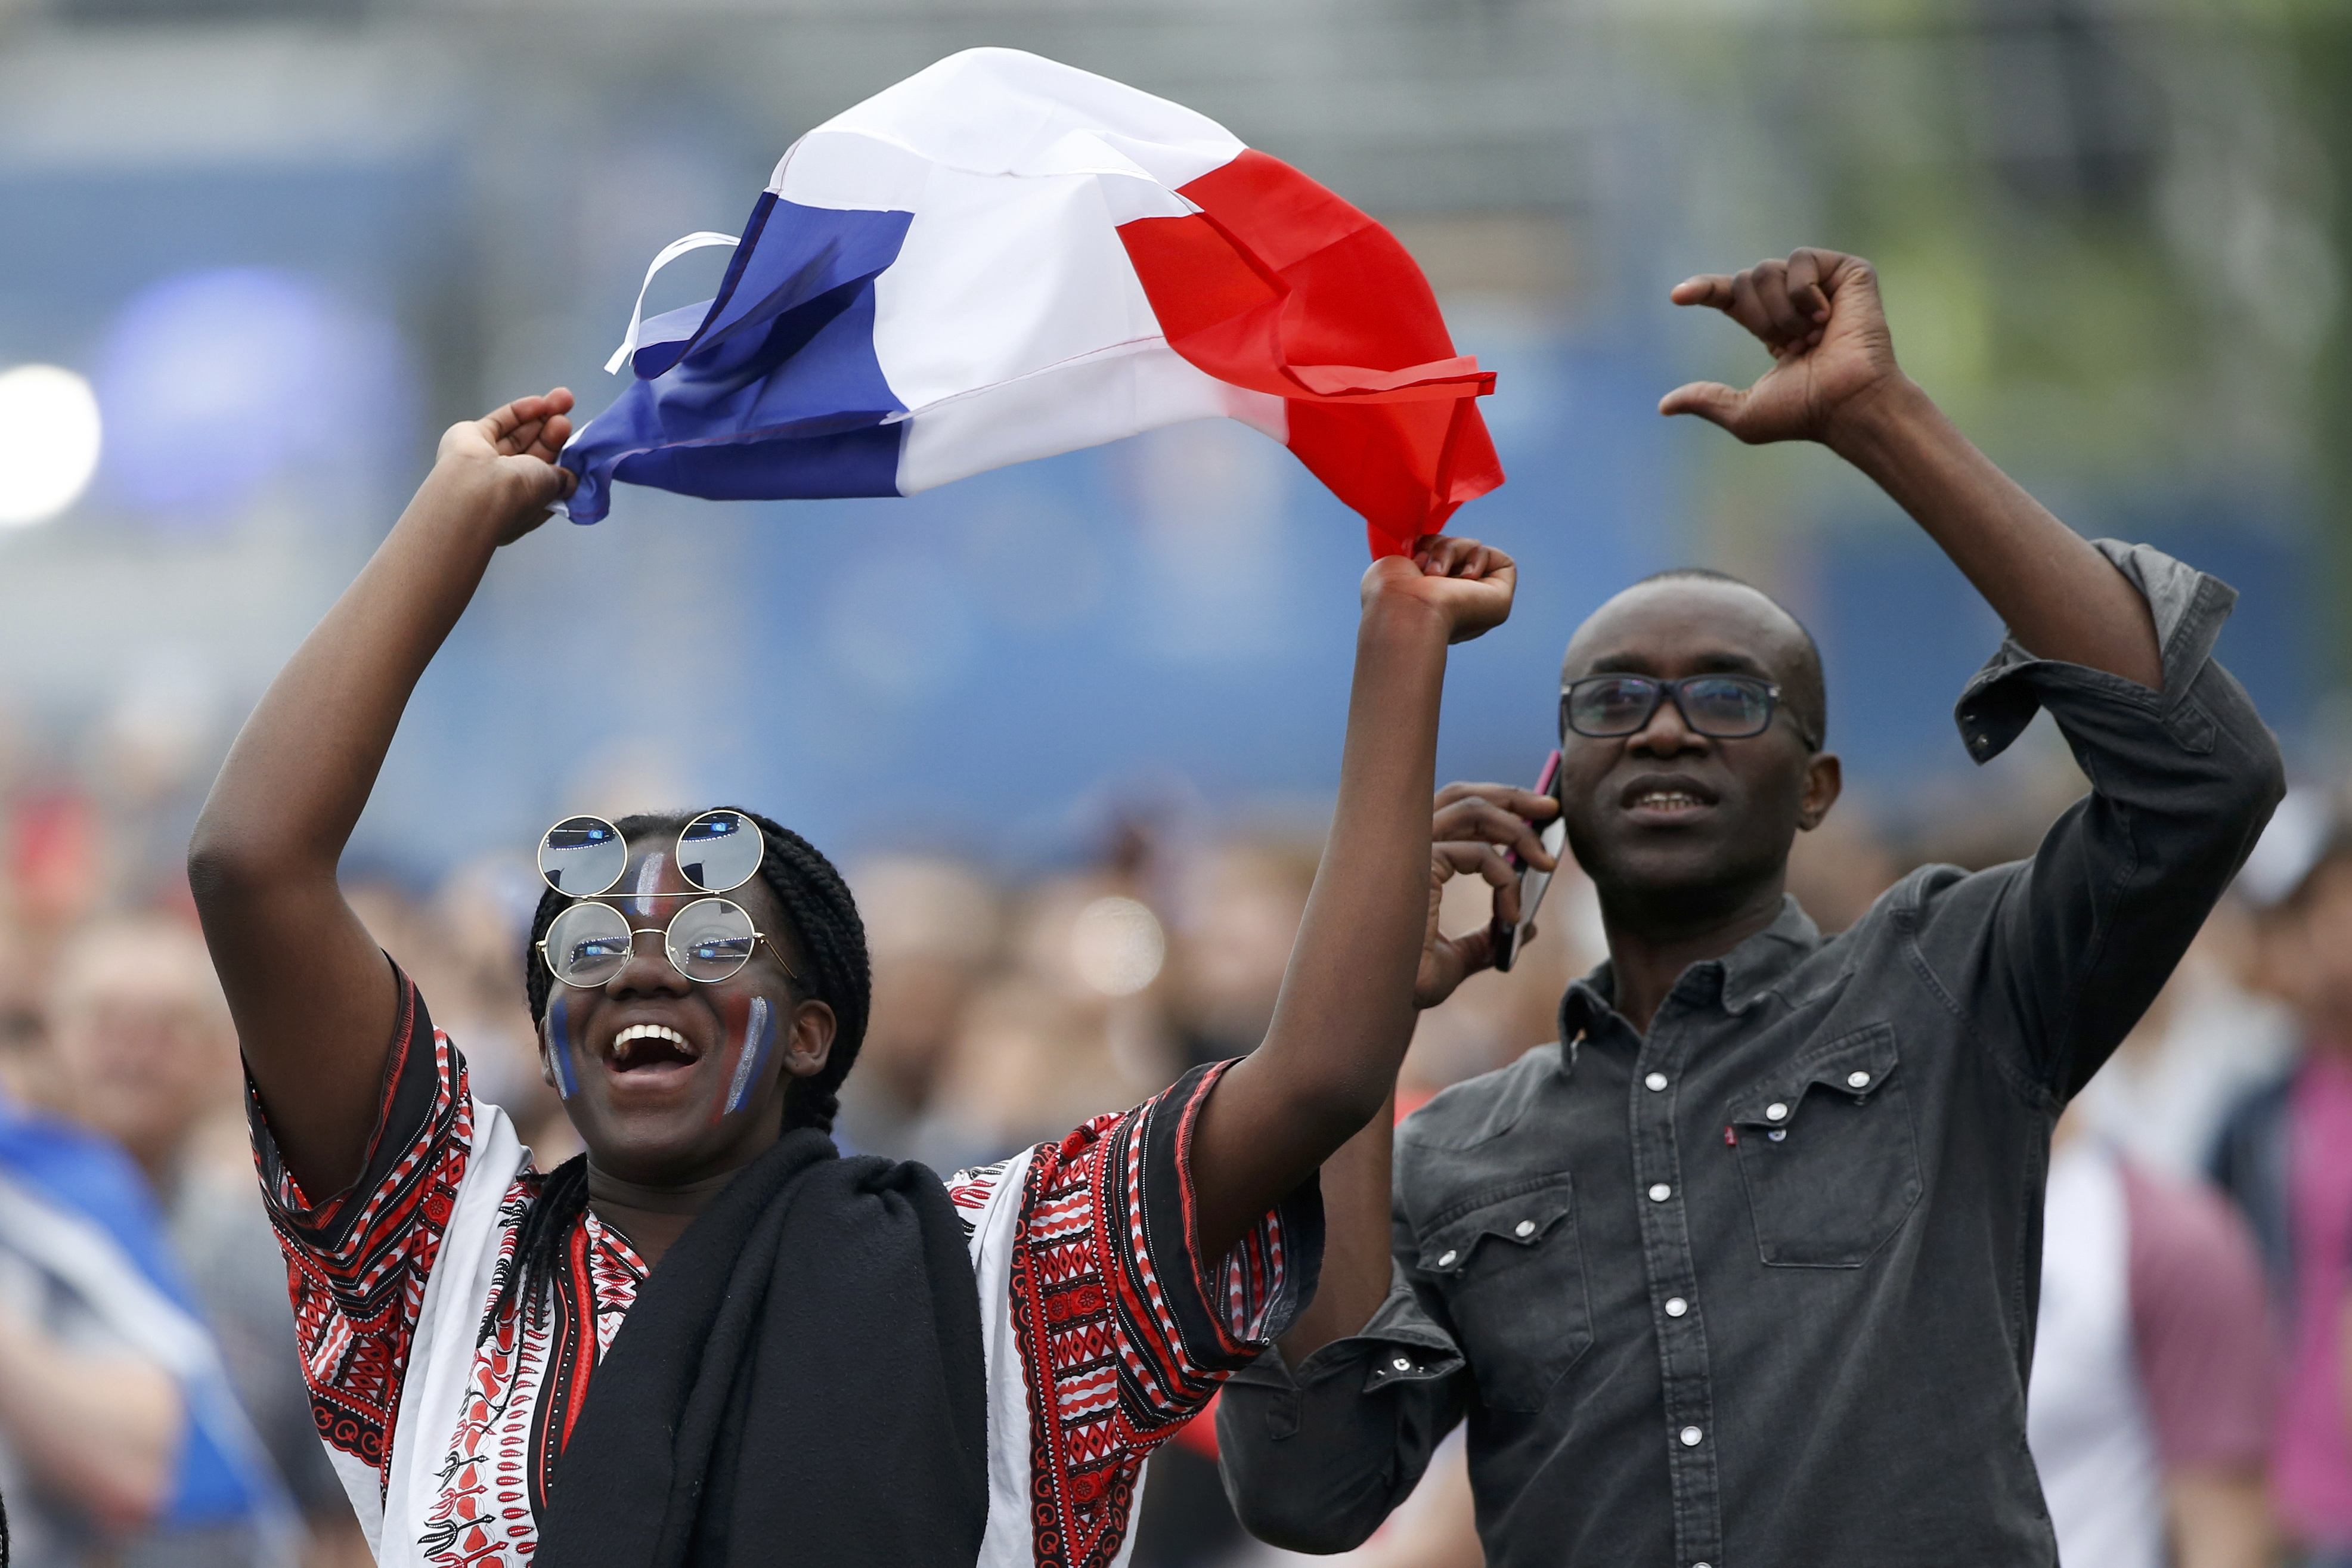 Hosts France get Euro 2016 party started on peaceful Paris night